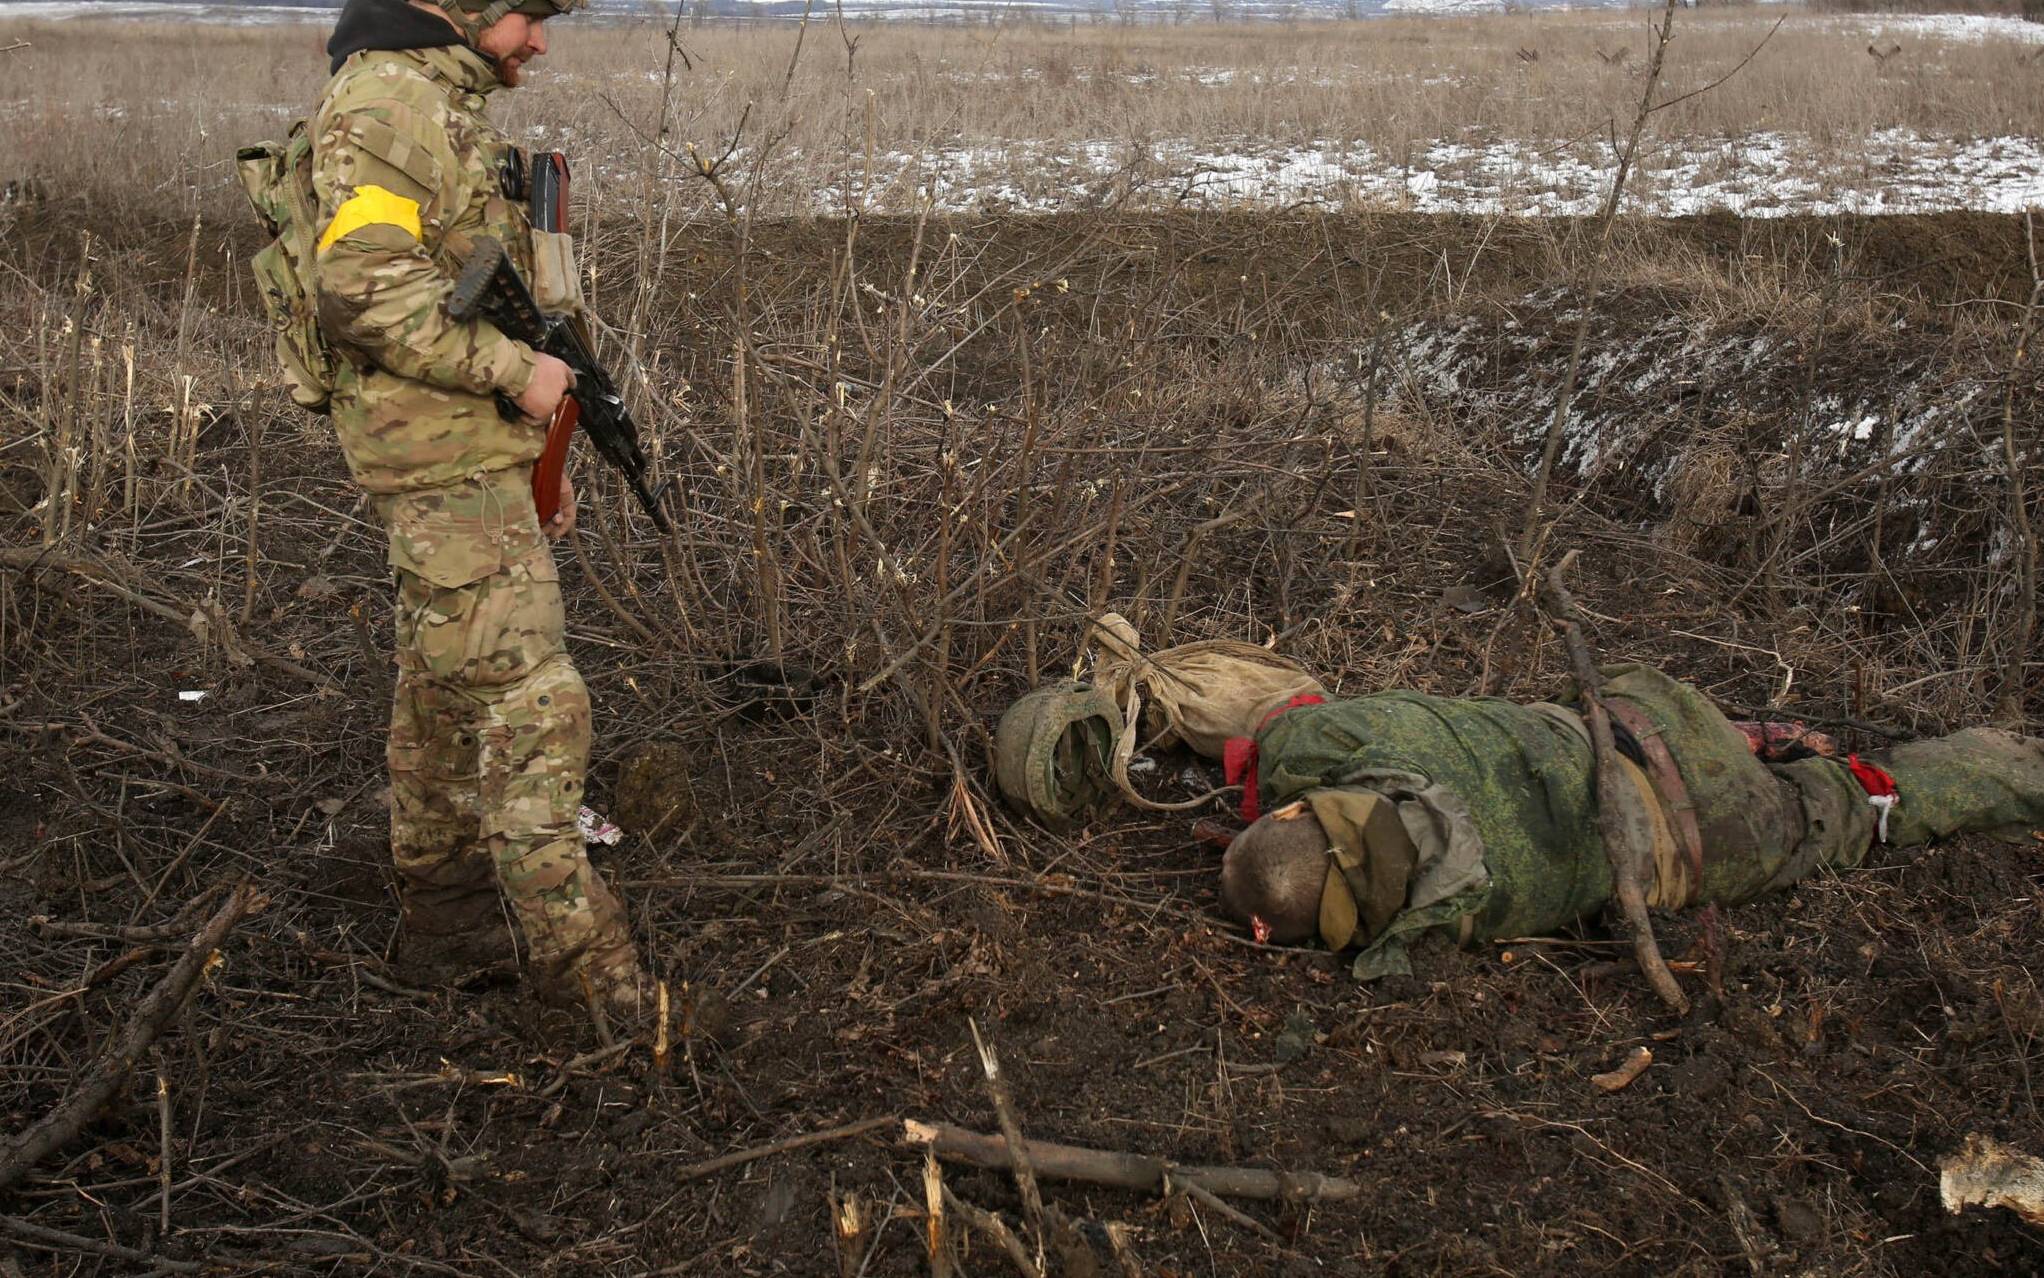 EDITORS NOTE: Graphic content / A serviceman of the Ukrainian Military Forces examines a body following fighting against Russian troops and Russia-backed separatists near the village of Zolote, Lugansk region on March 6, 2022. - Russia's invasion of Ukraine, now in its eleventh day, has seen more than 1.5 million people flee the country in what the UN has called "Europe's fastest growing refugee crisis since World War II". (Photo by Anatolii Stepanov / AFP)